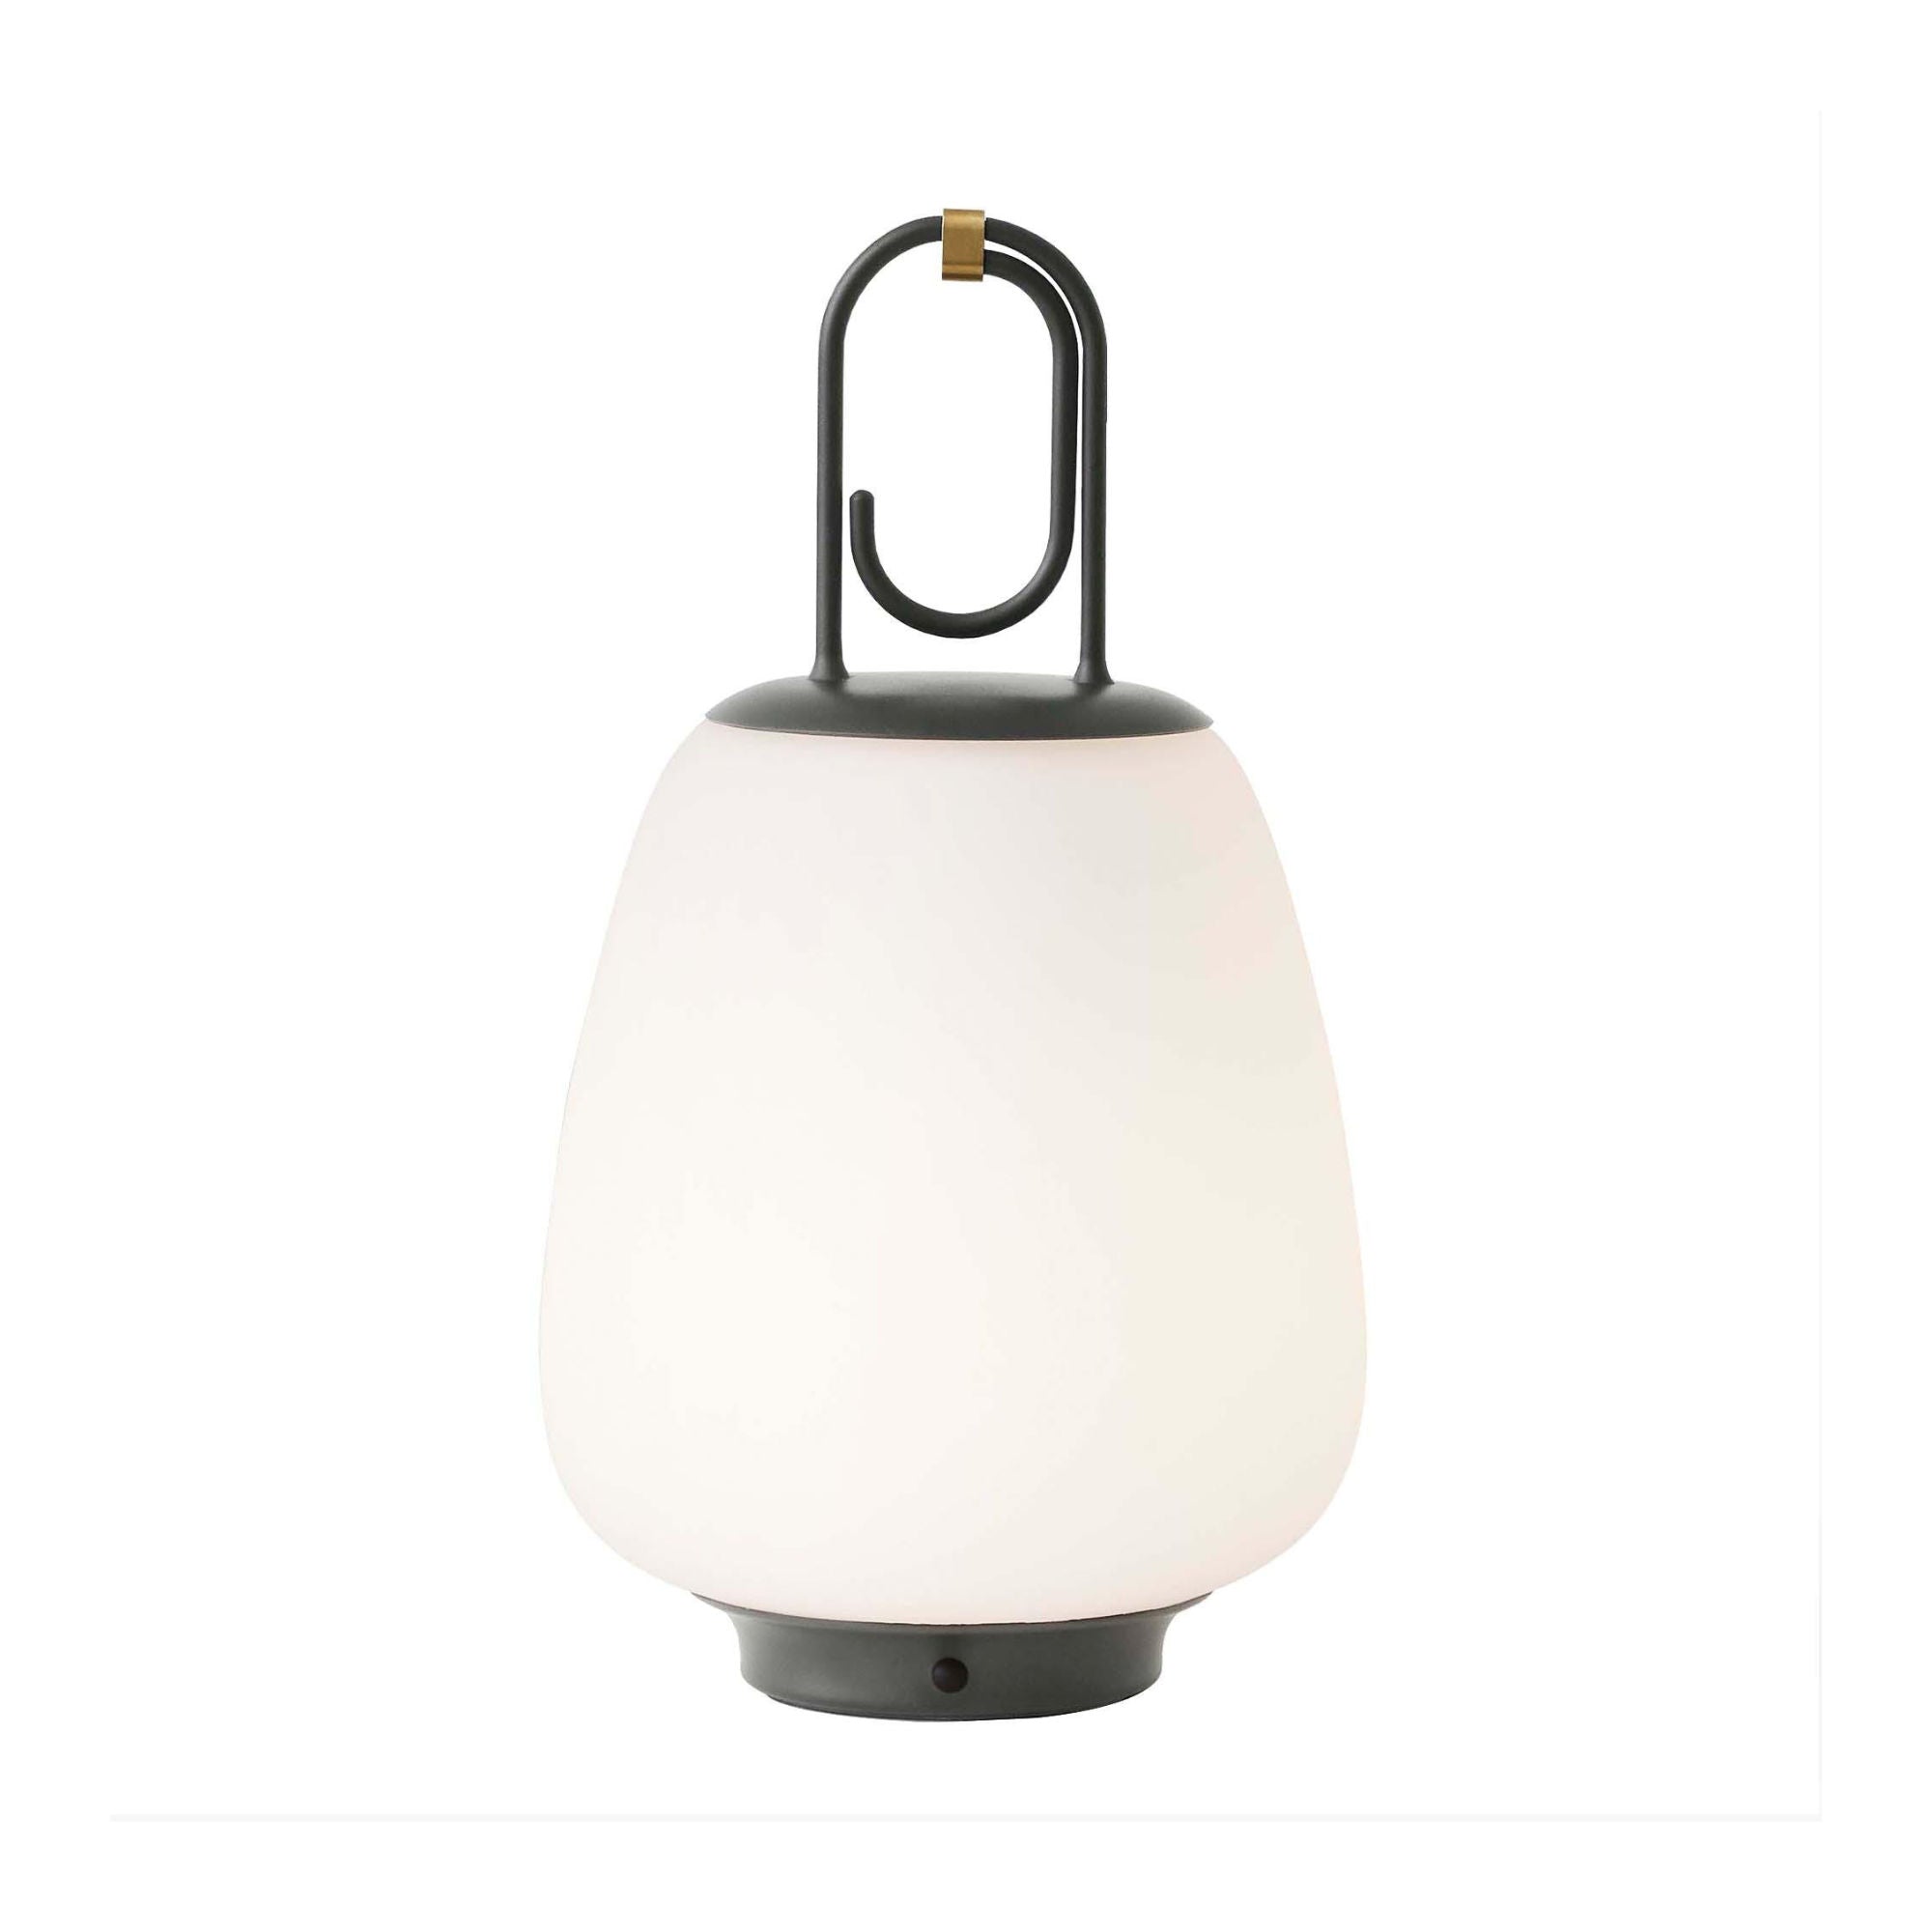 &Tradition SC51 Lucca rechargeable lamp, Moss Grey